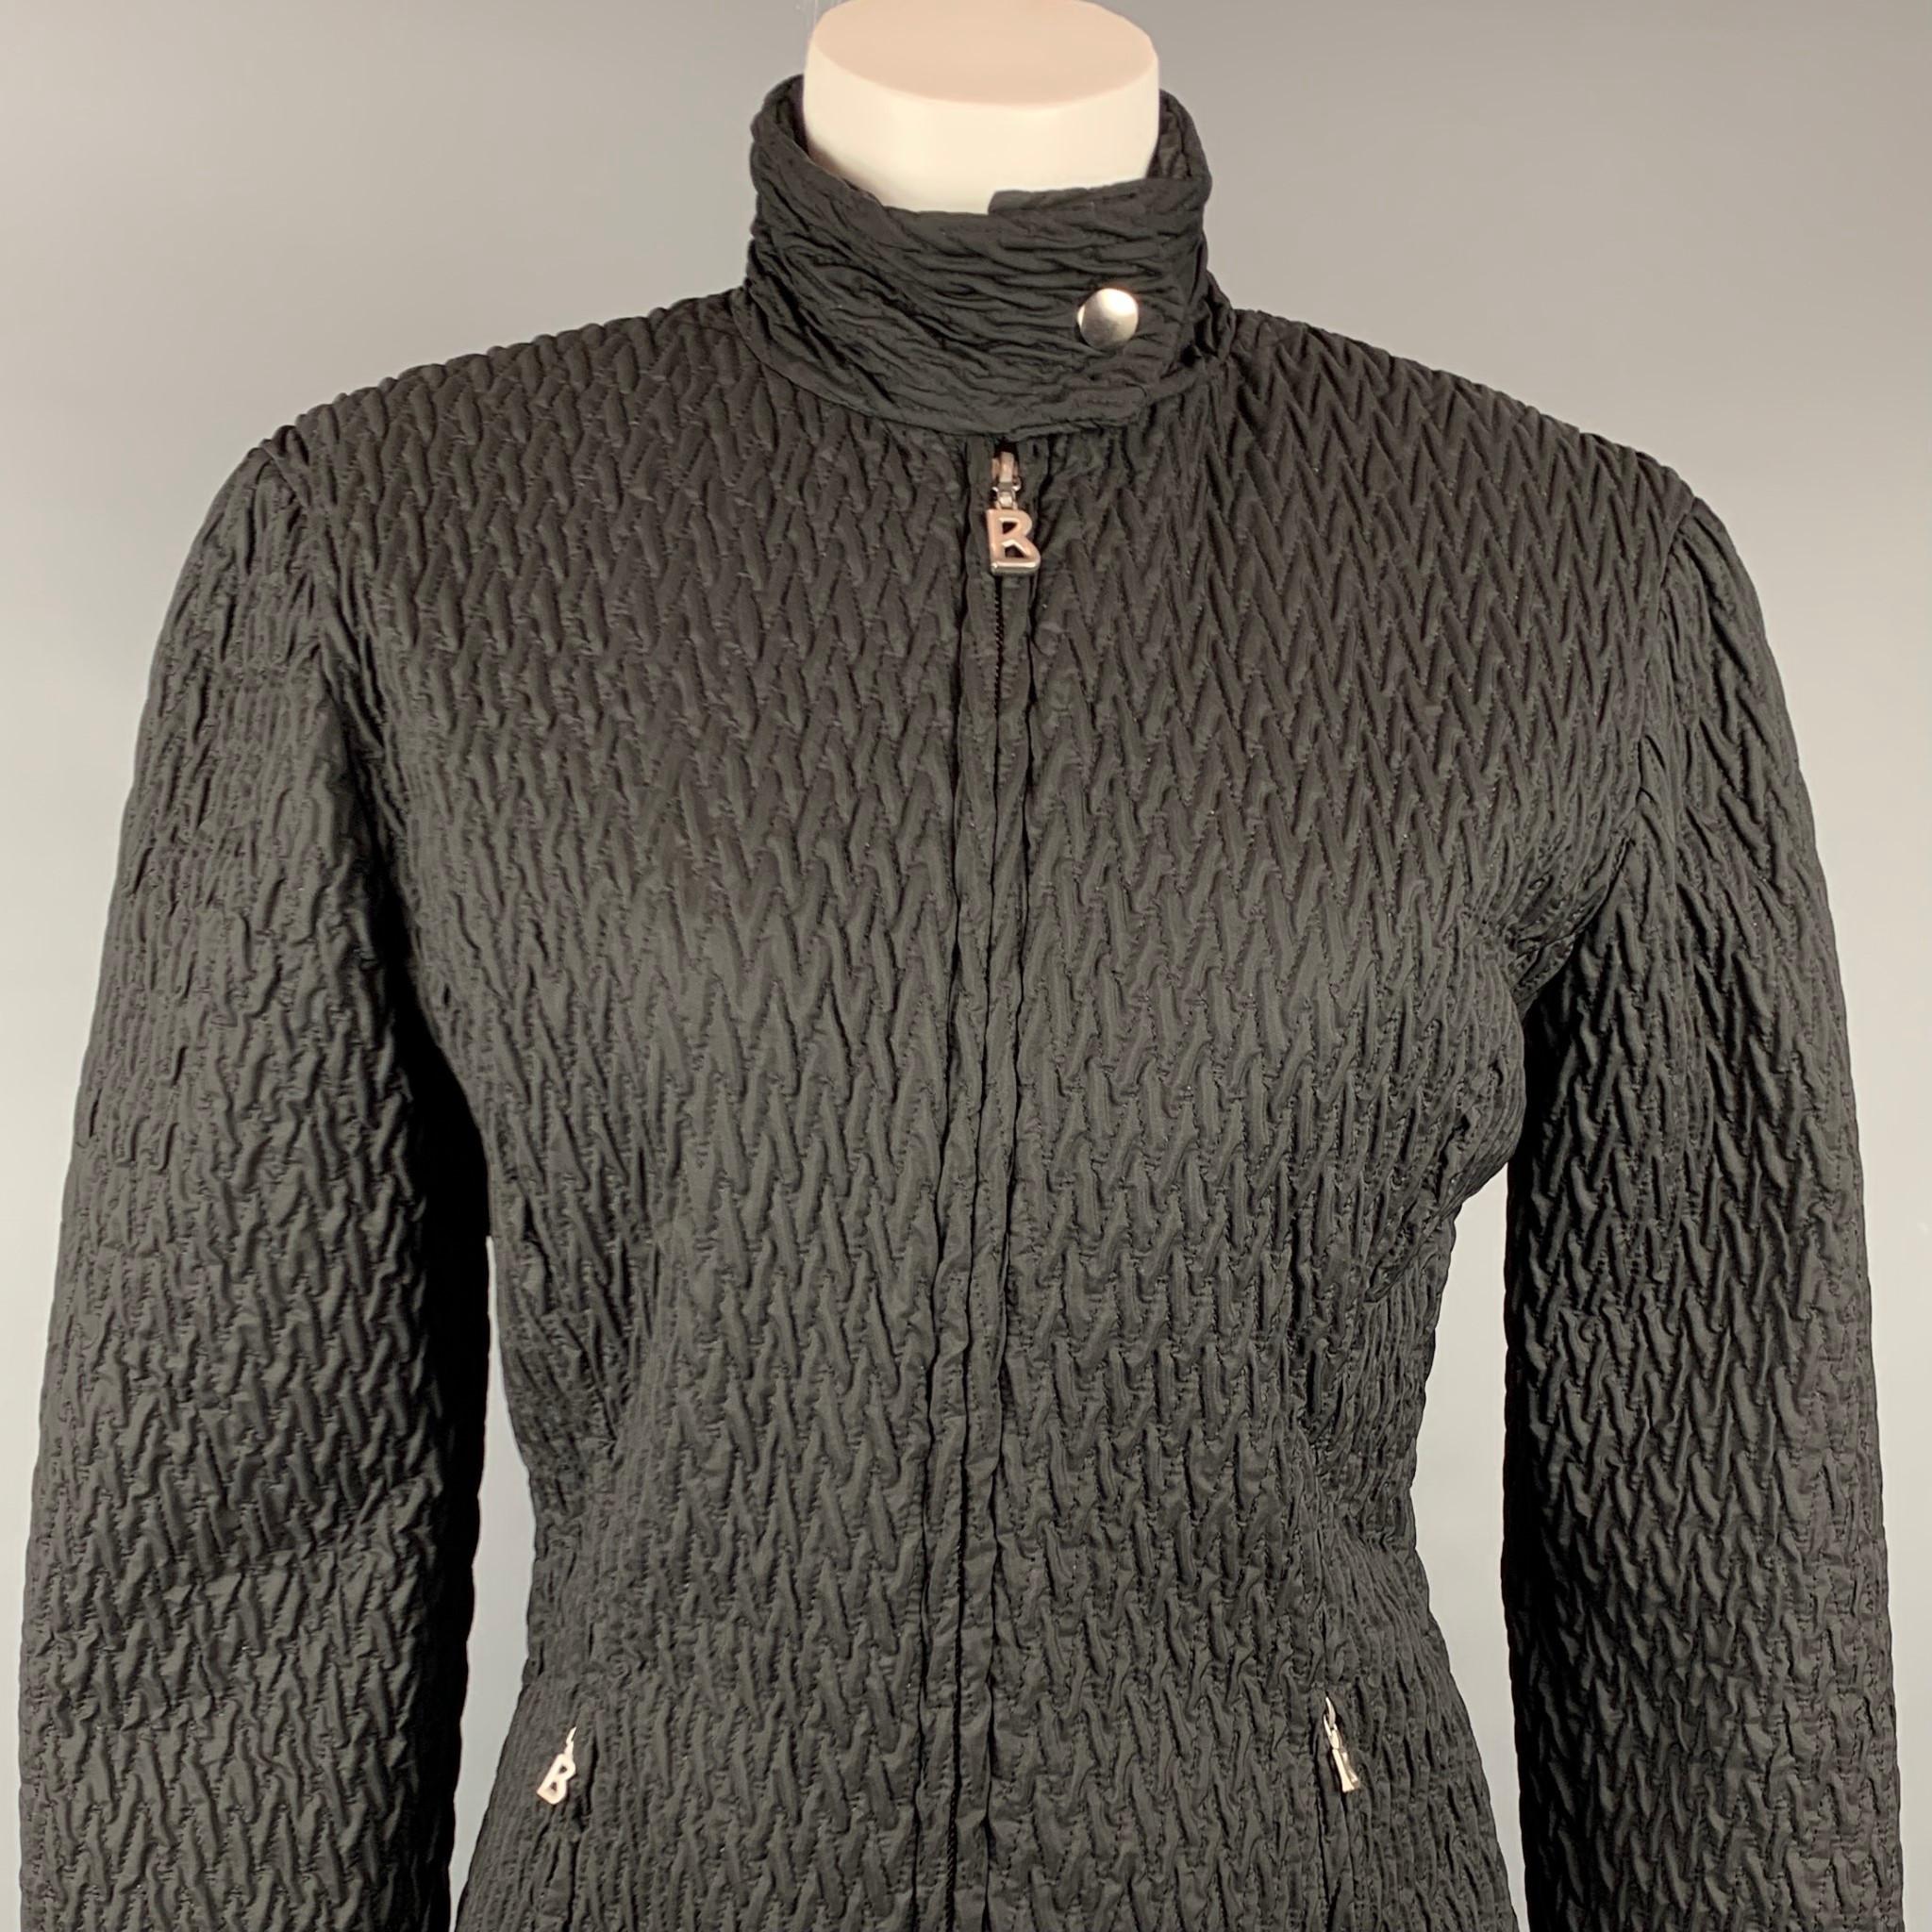 BOGNER jacket comes in a black textured quilted nylon featuring a buttoned collar, silver tone hardware, and a full zip closure. Made in USA.

Very Good Pre-Owned Condition.
Marked: 6
Original Retail Price: $650.00

Measurements:

Shoulder: 18